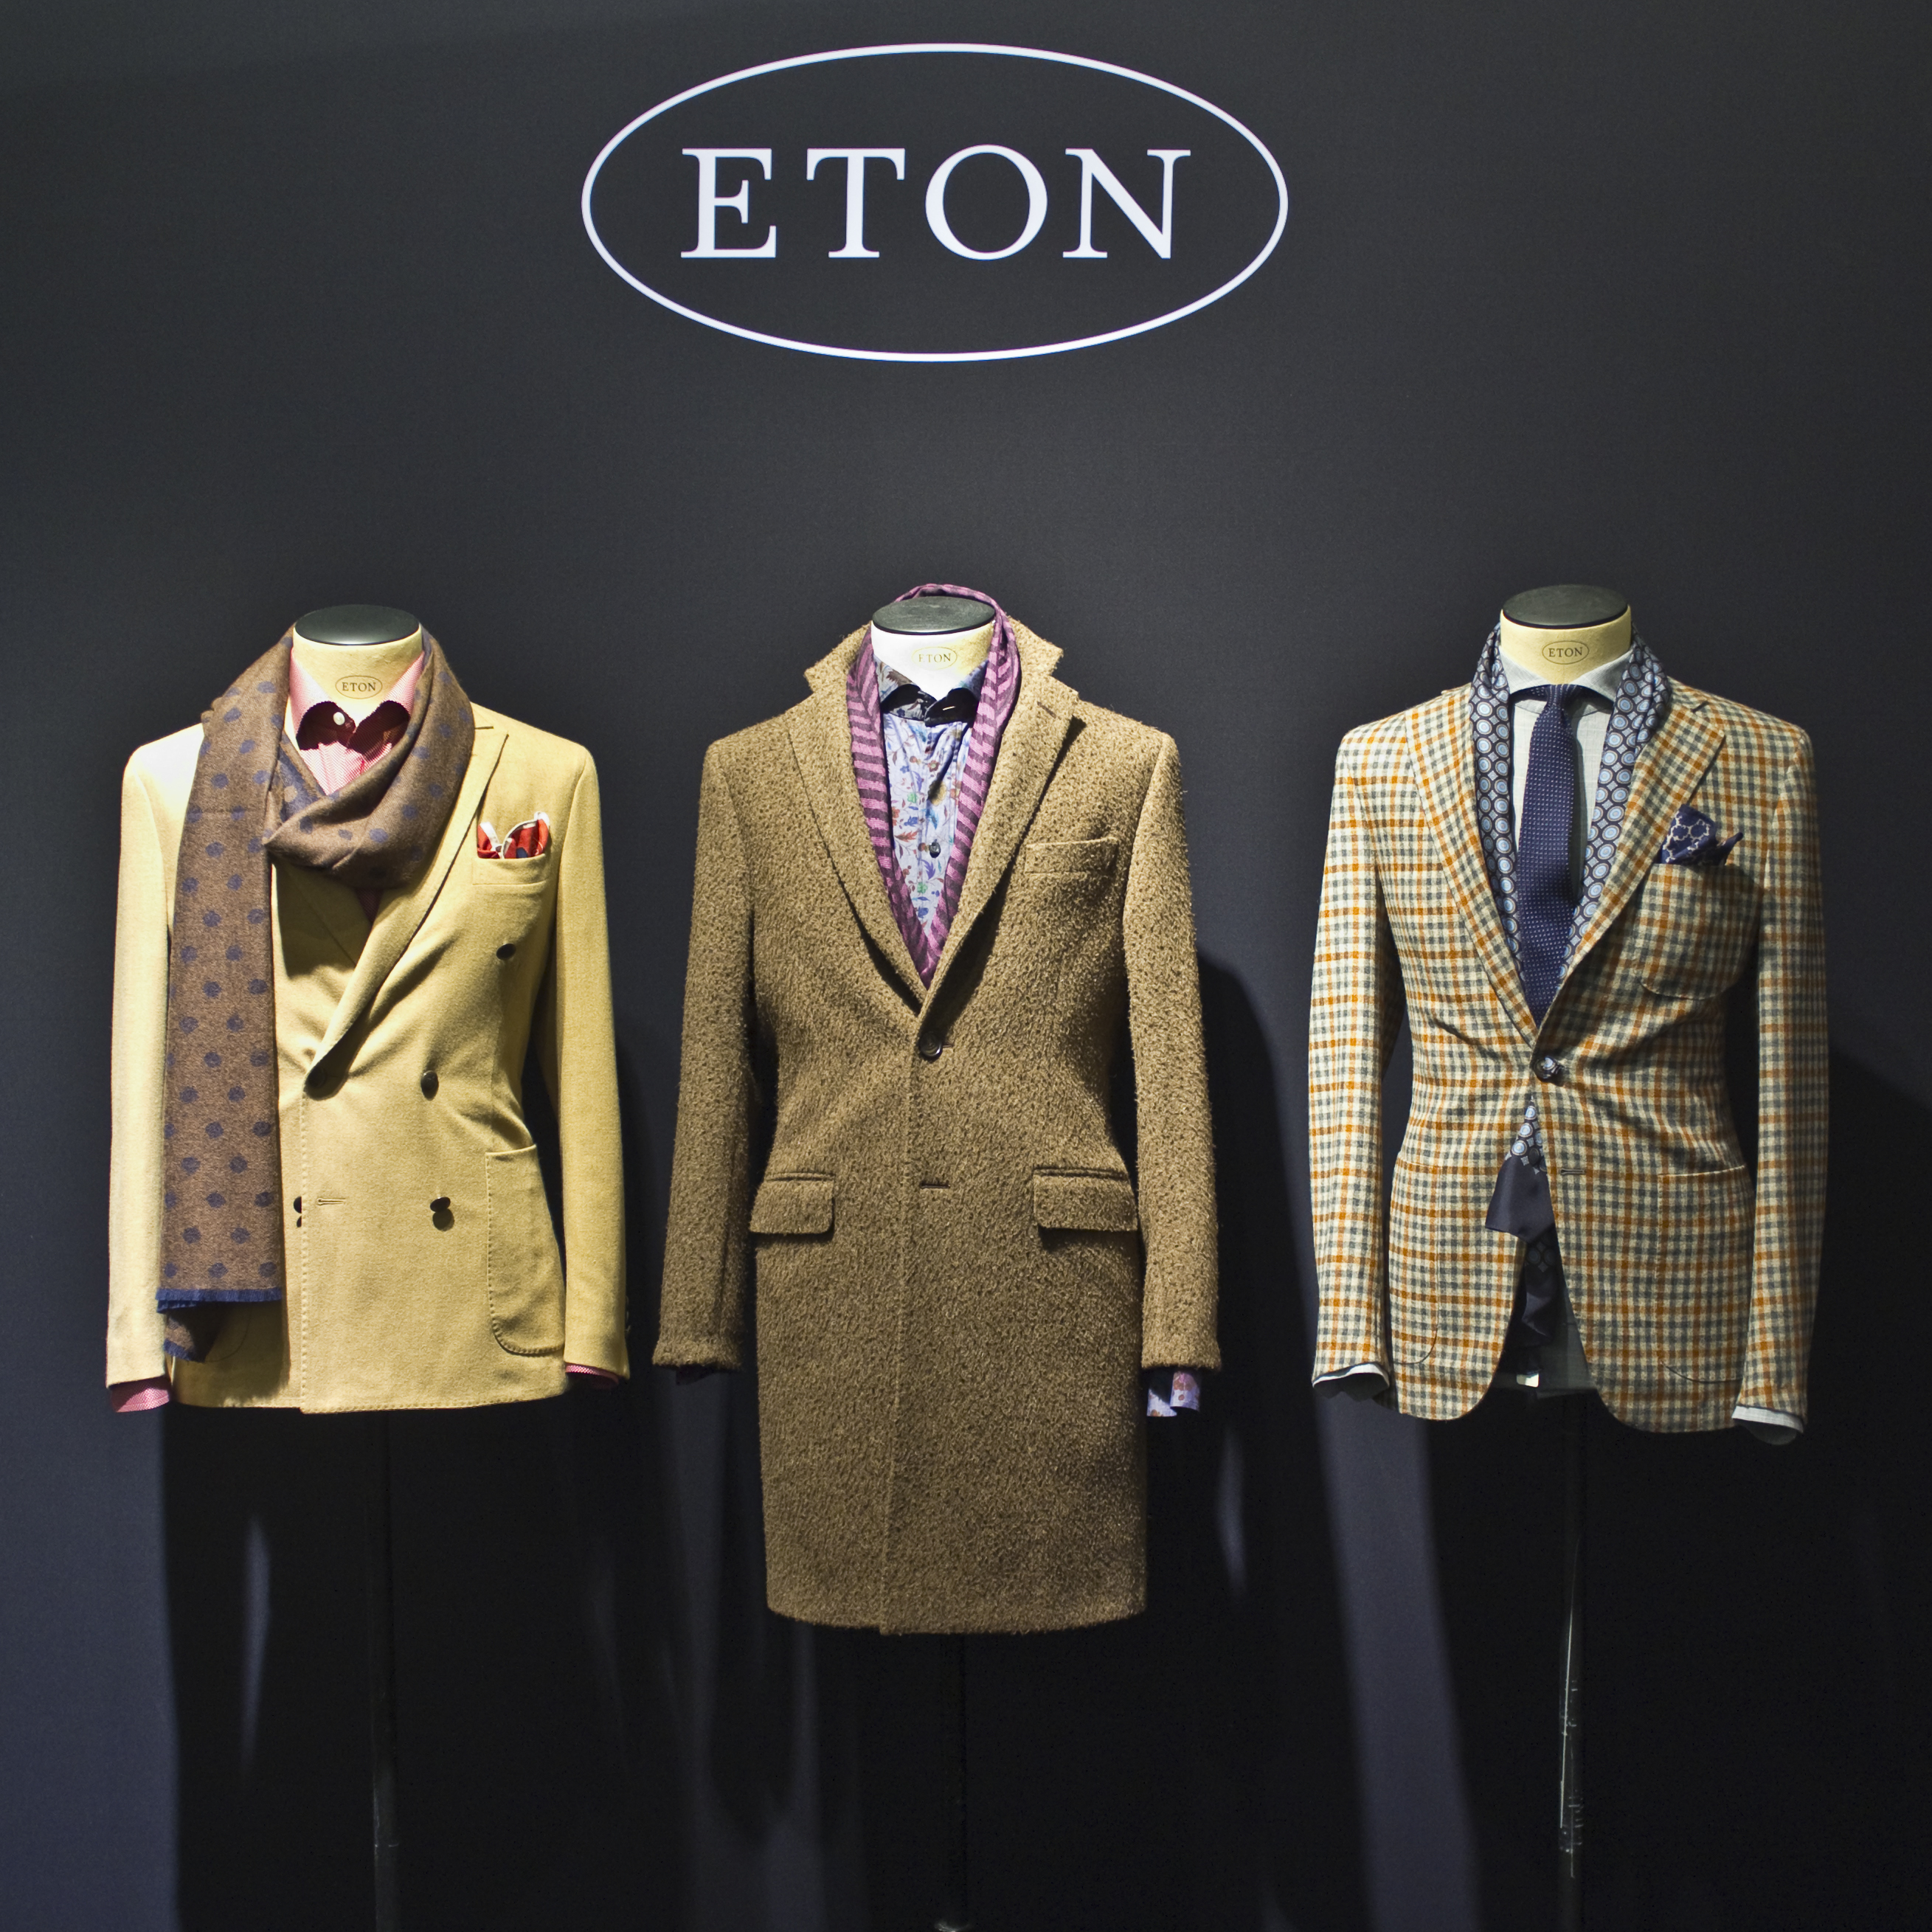 Pitti Uomo 87 in pictures - Page 6